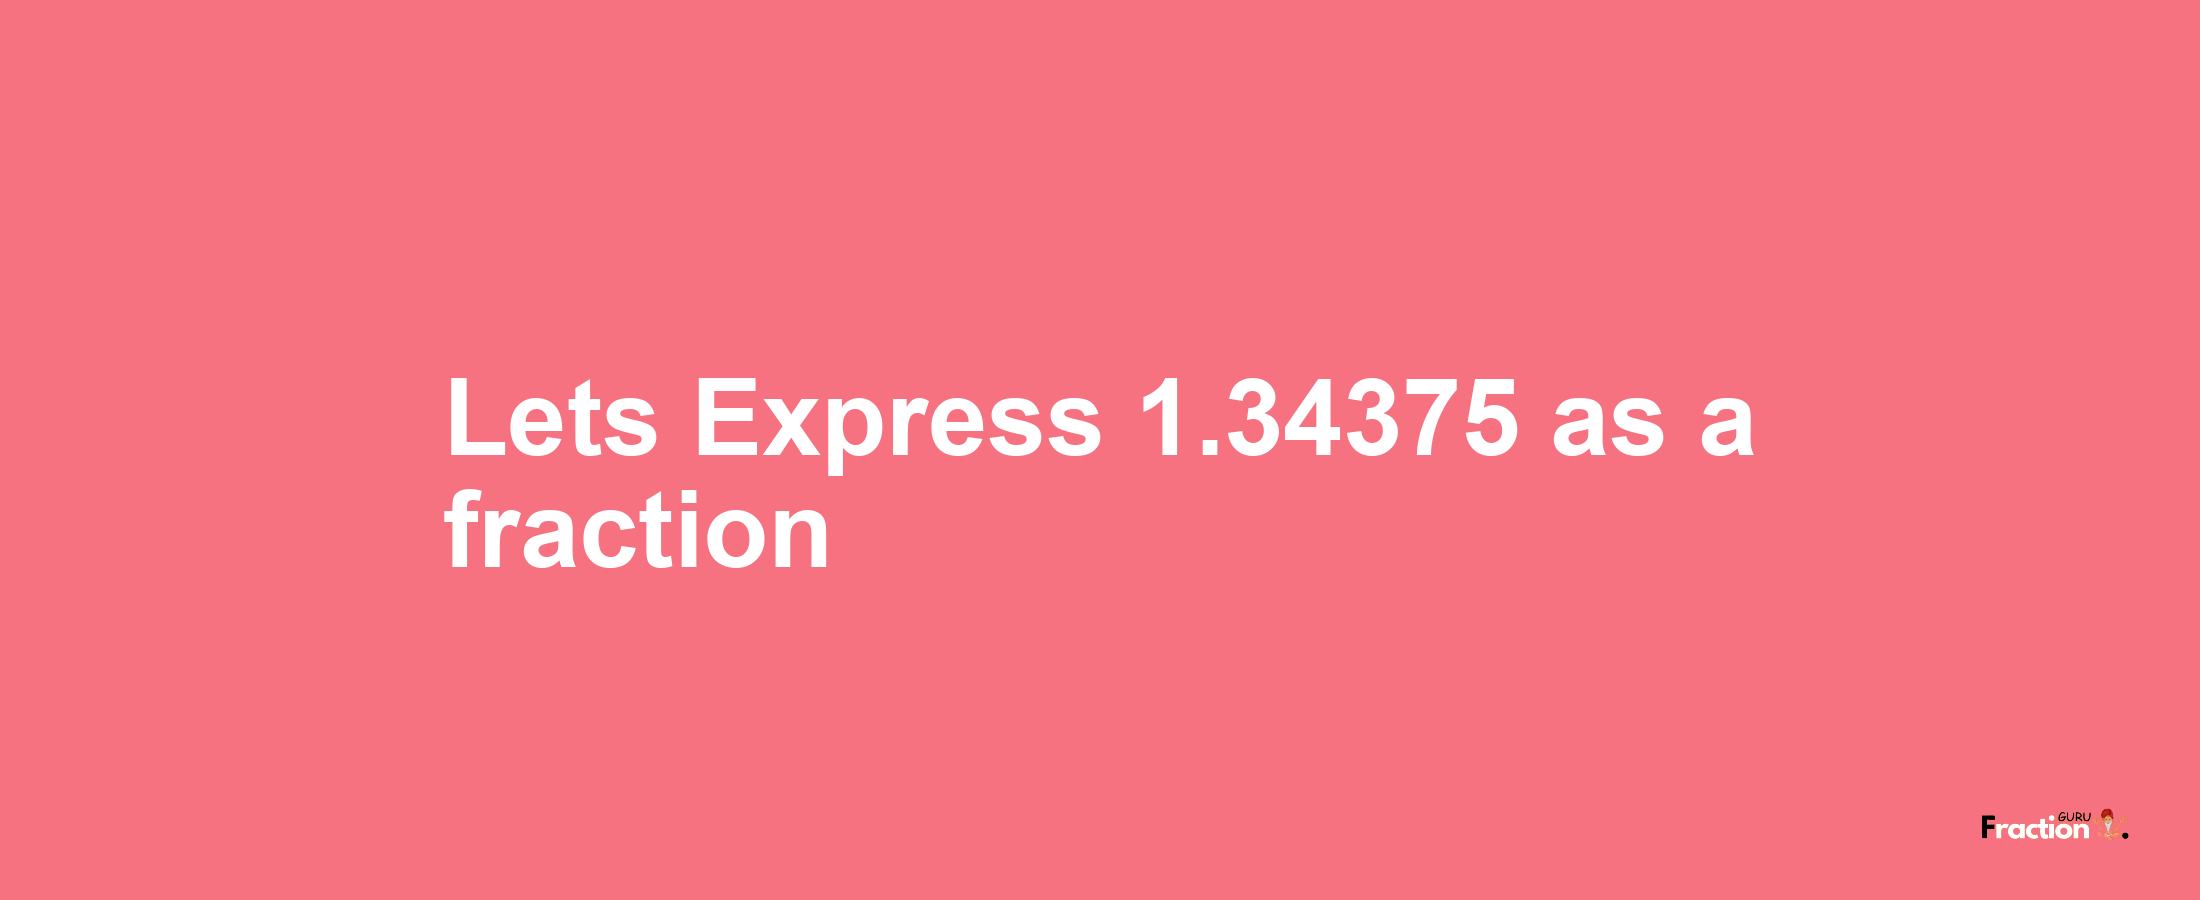 Lets Express 1.34375 as afraction